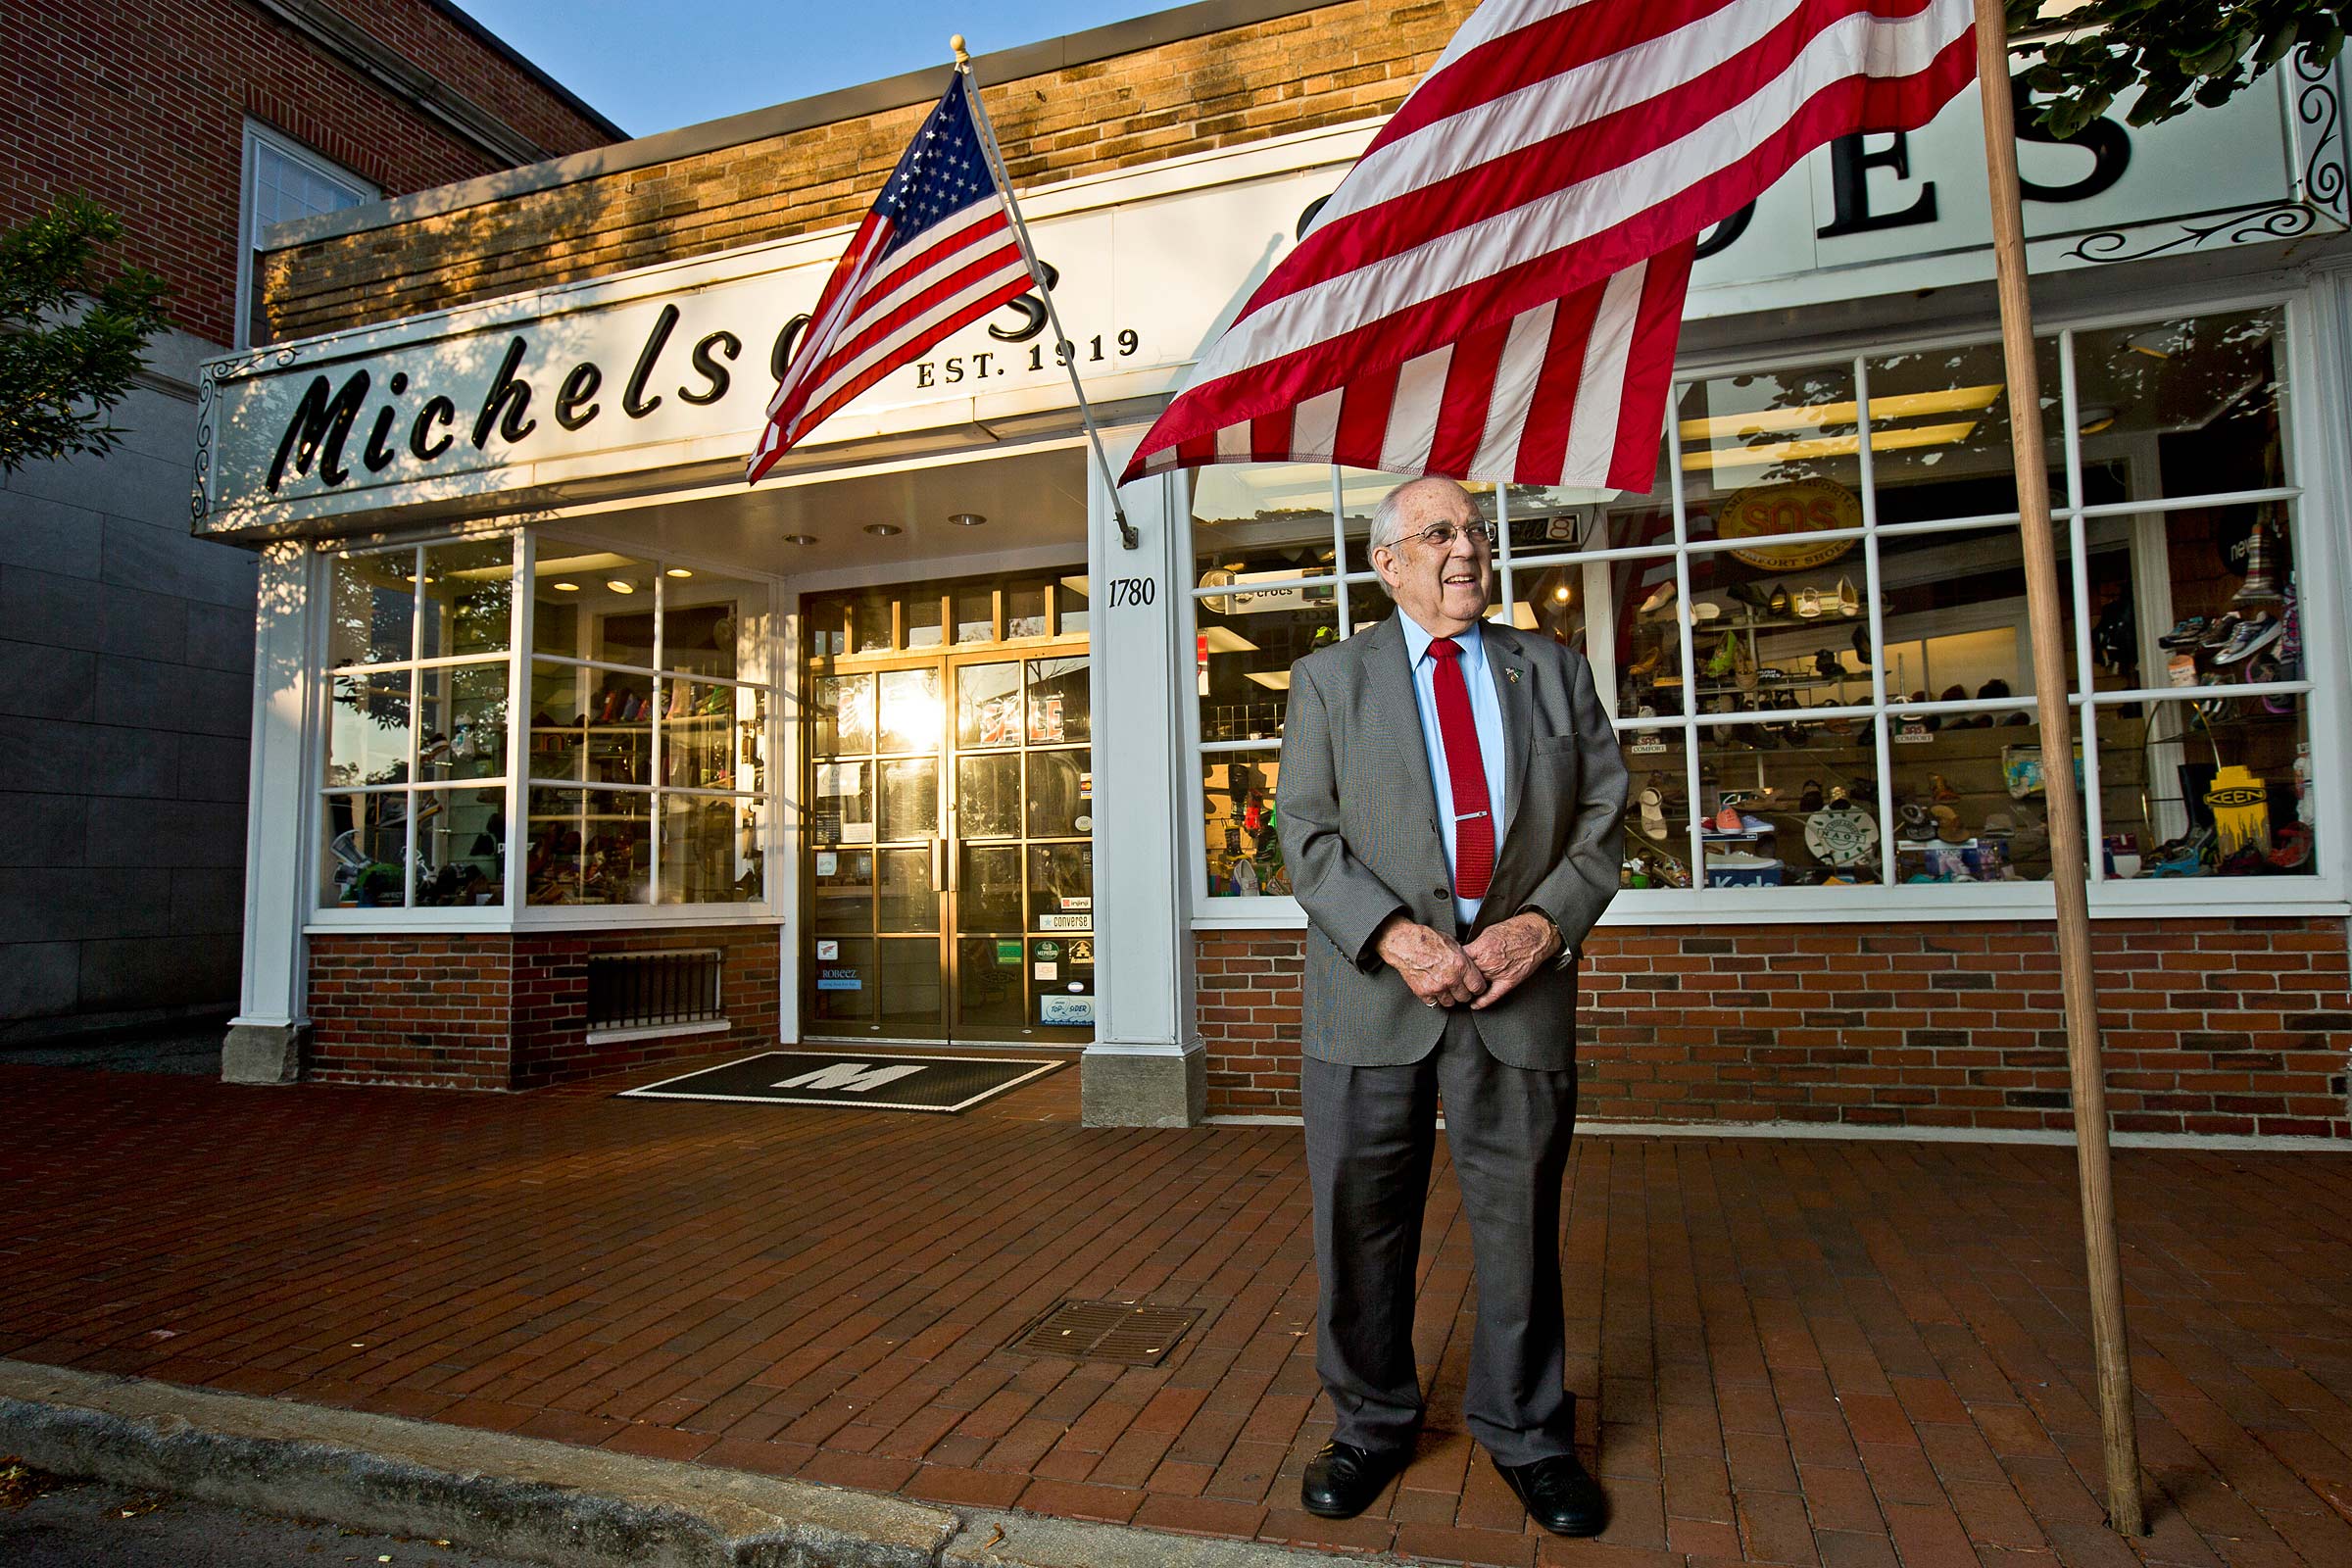 Michelson Shoe Store and its owner Dick Michelson are fixtures in Lexington, MA. 